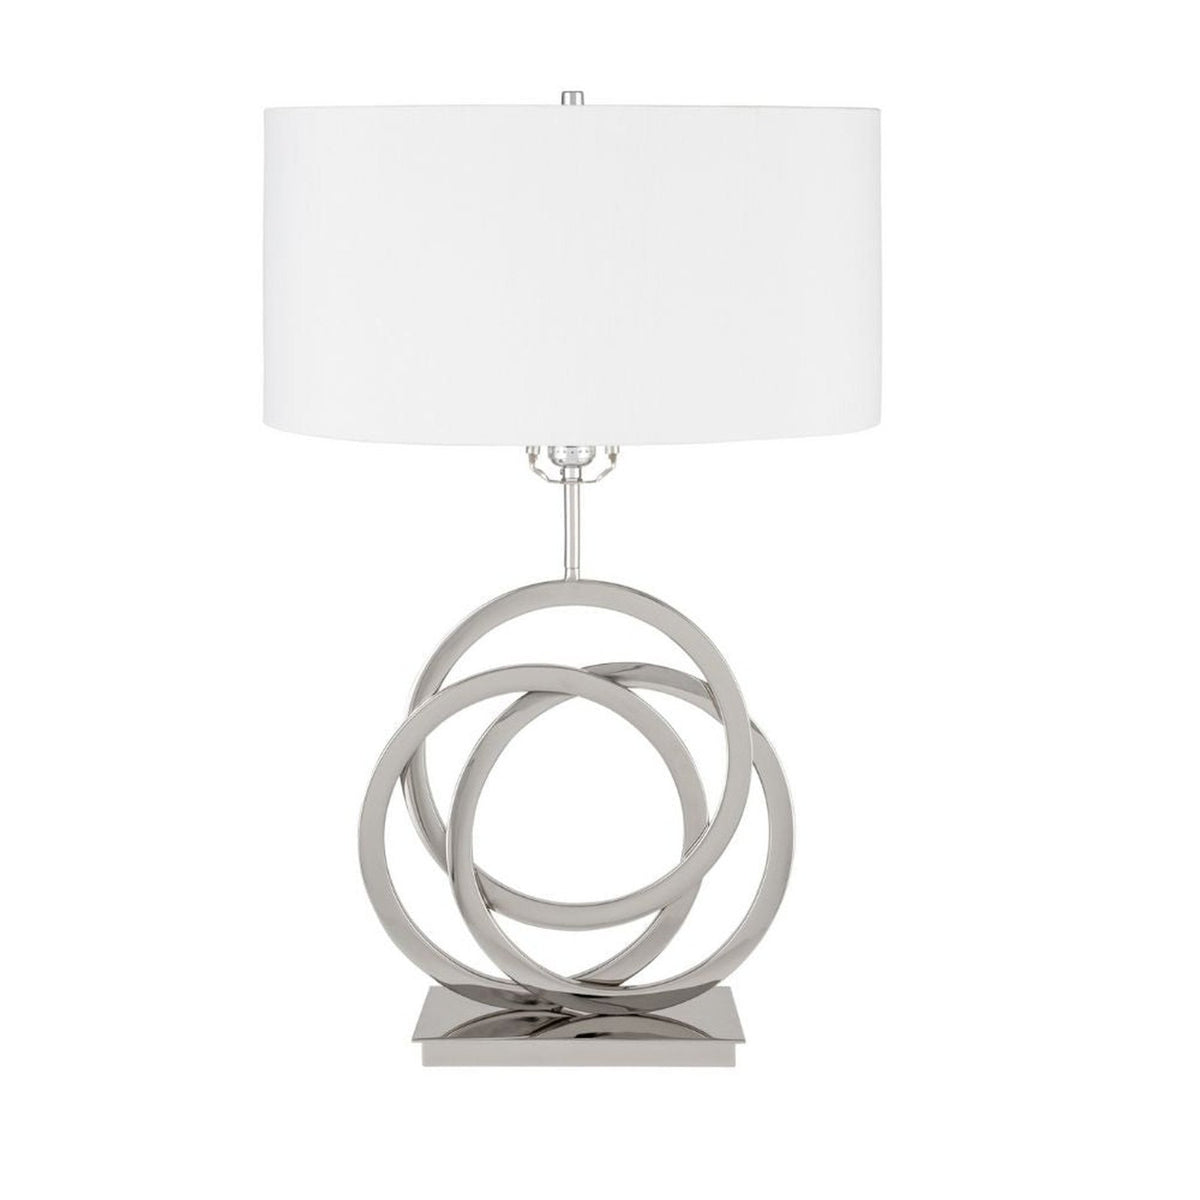 Origami Circles Chrome Table Lamp with USB Charger